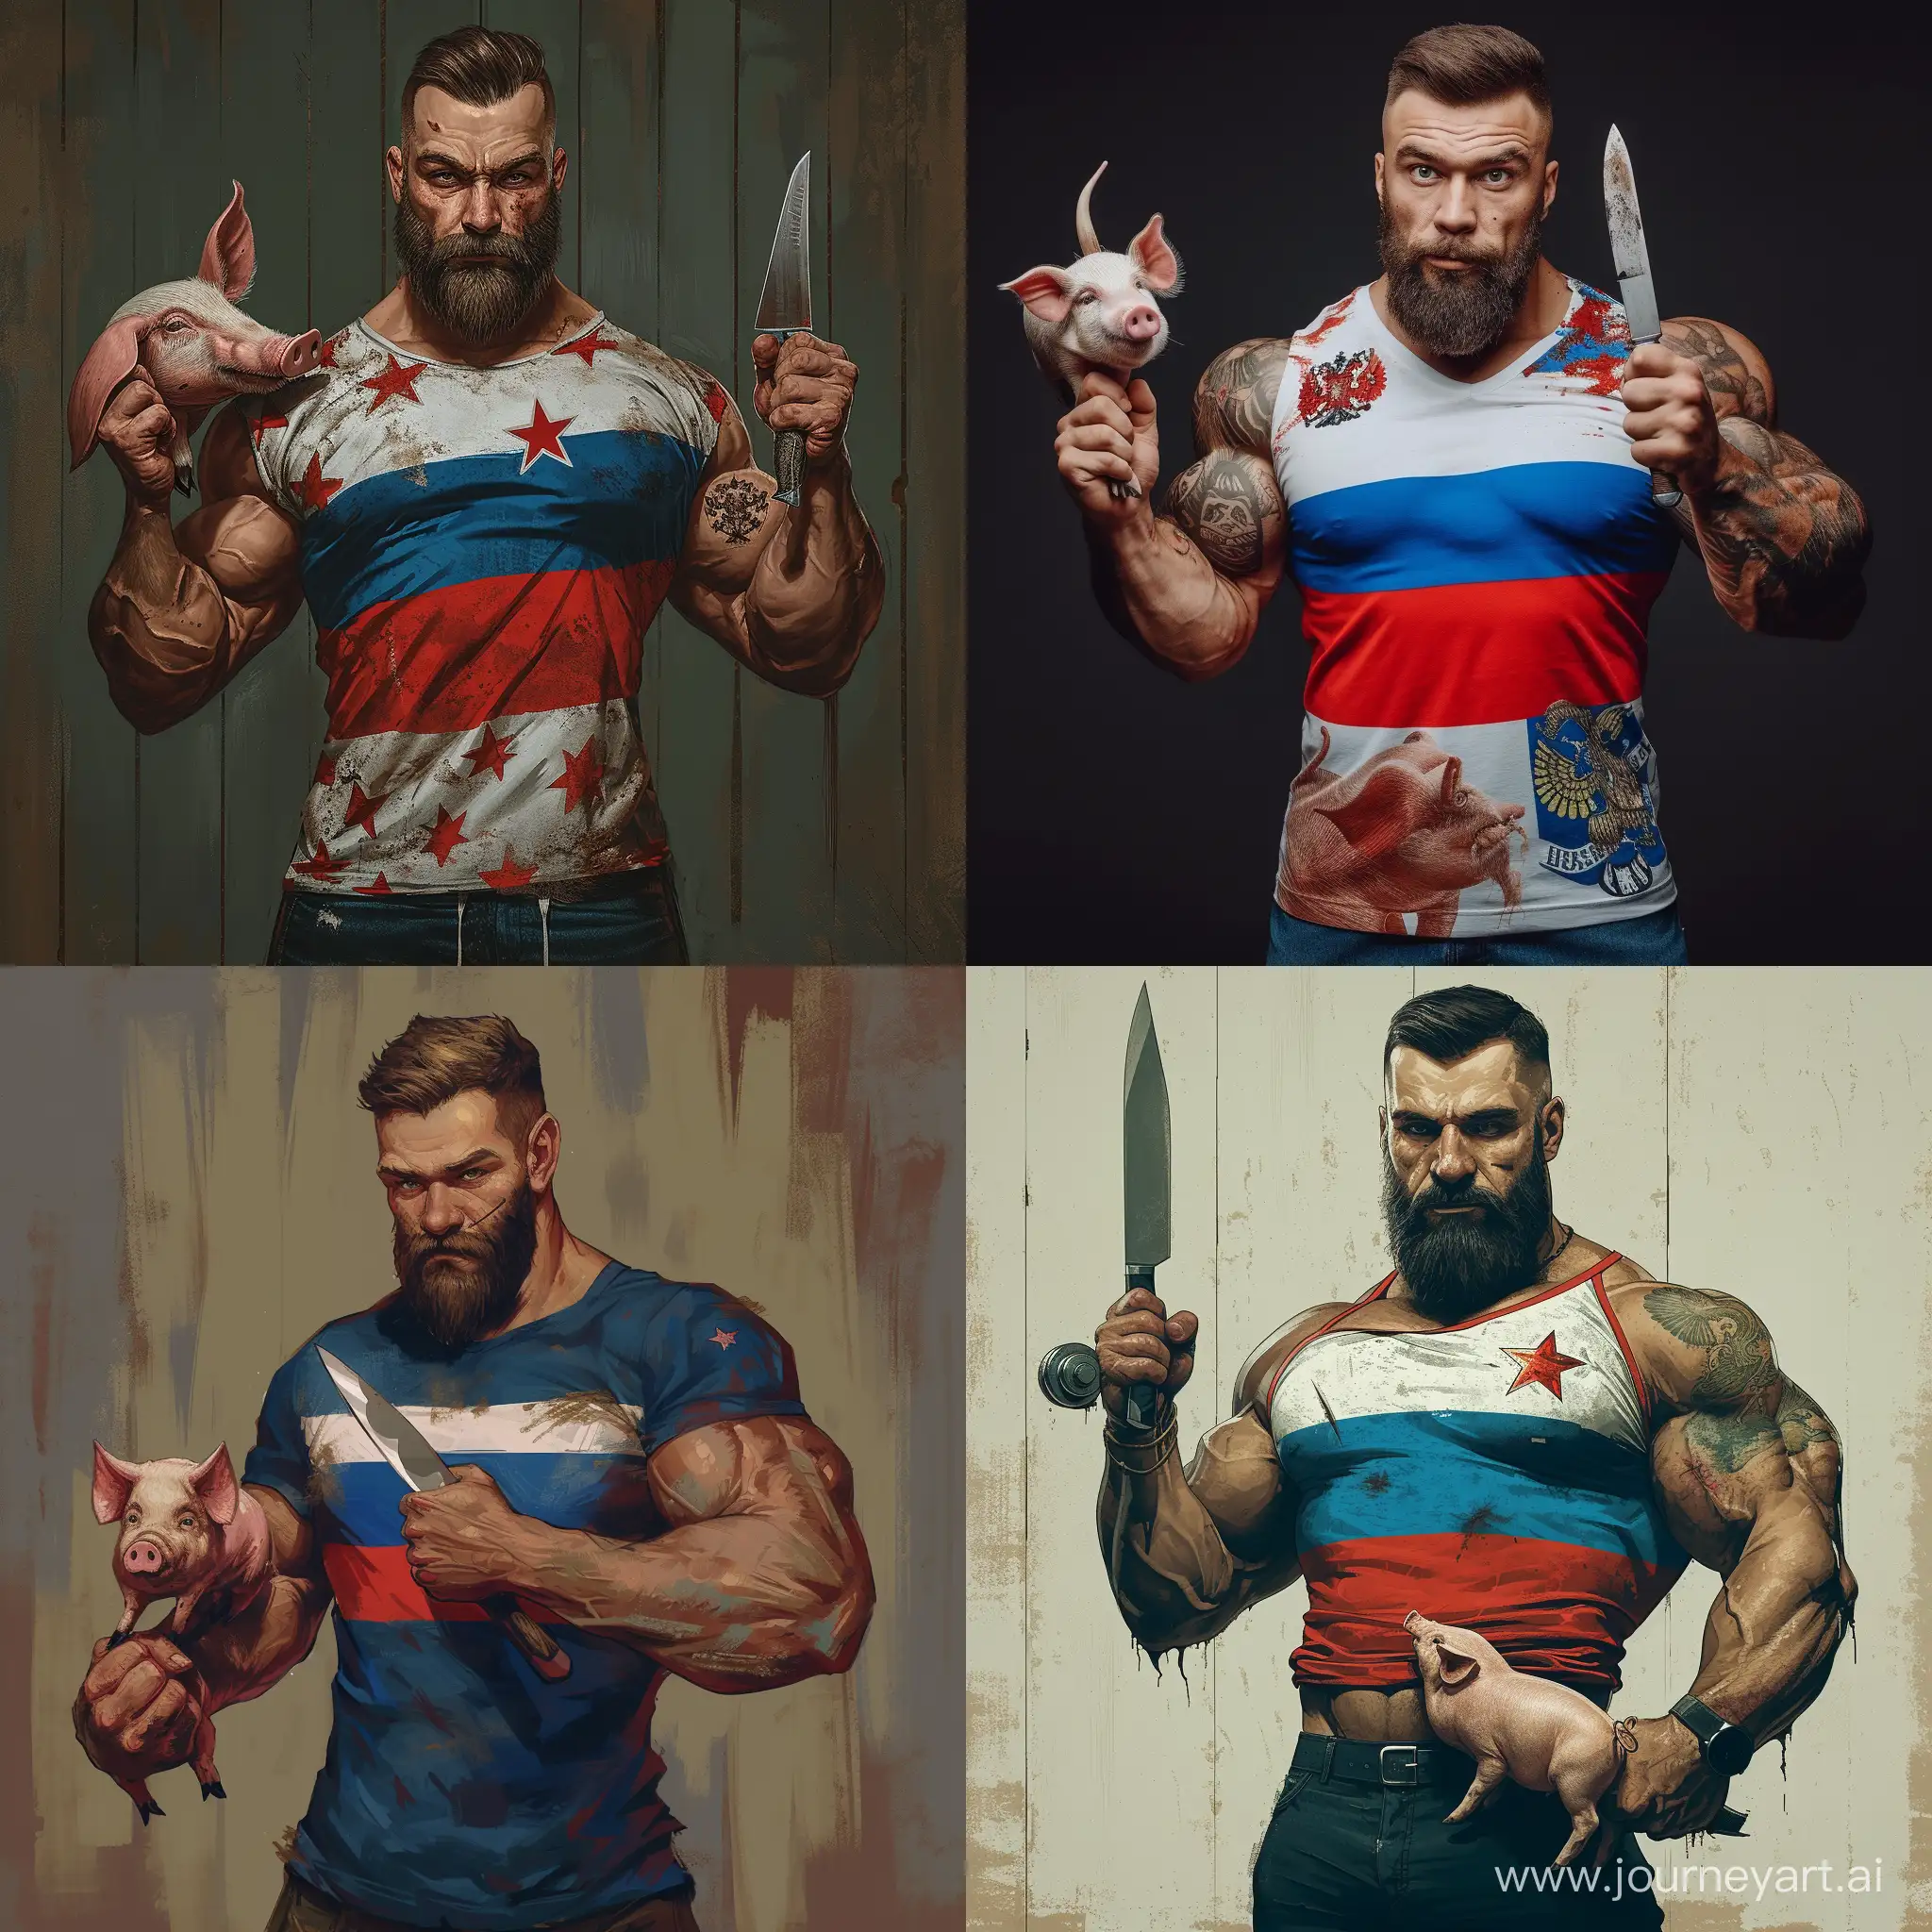 Russian-FlagWielding-Bodybuilder-Poses-with-a-Pig-and-Knife